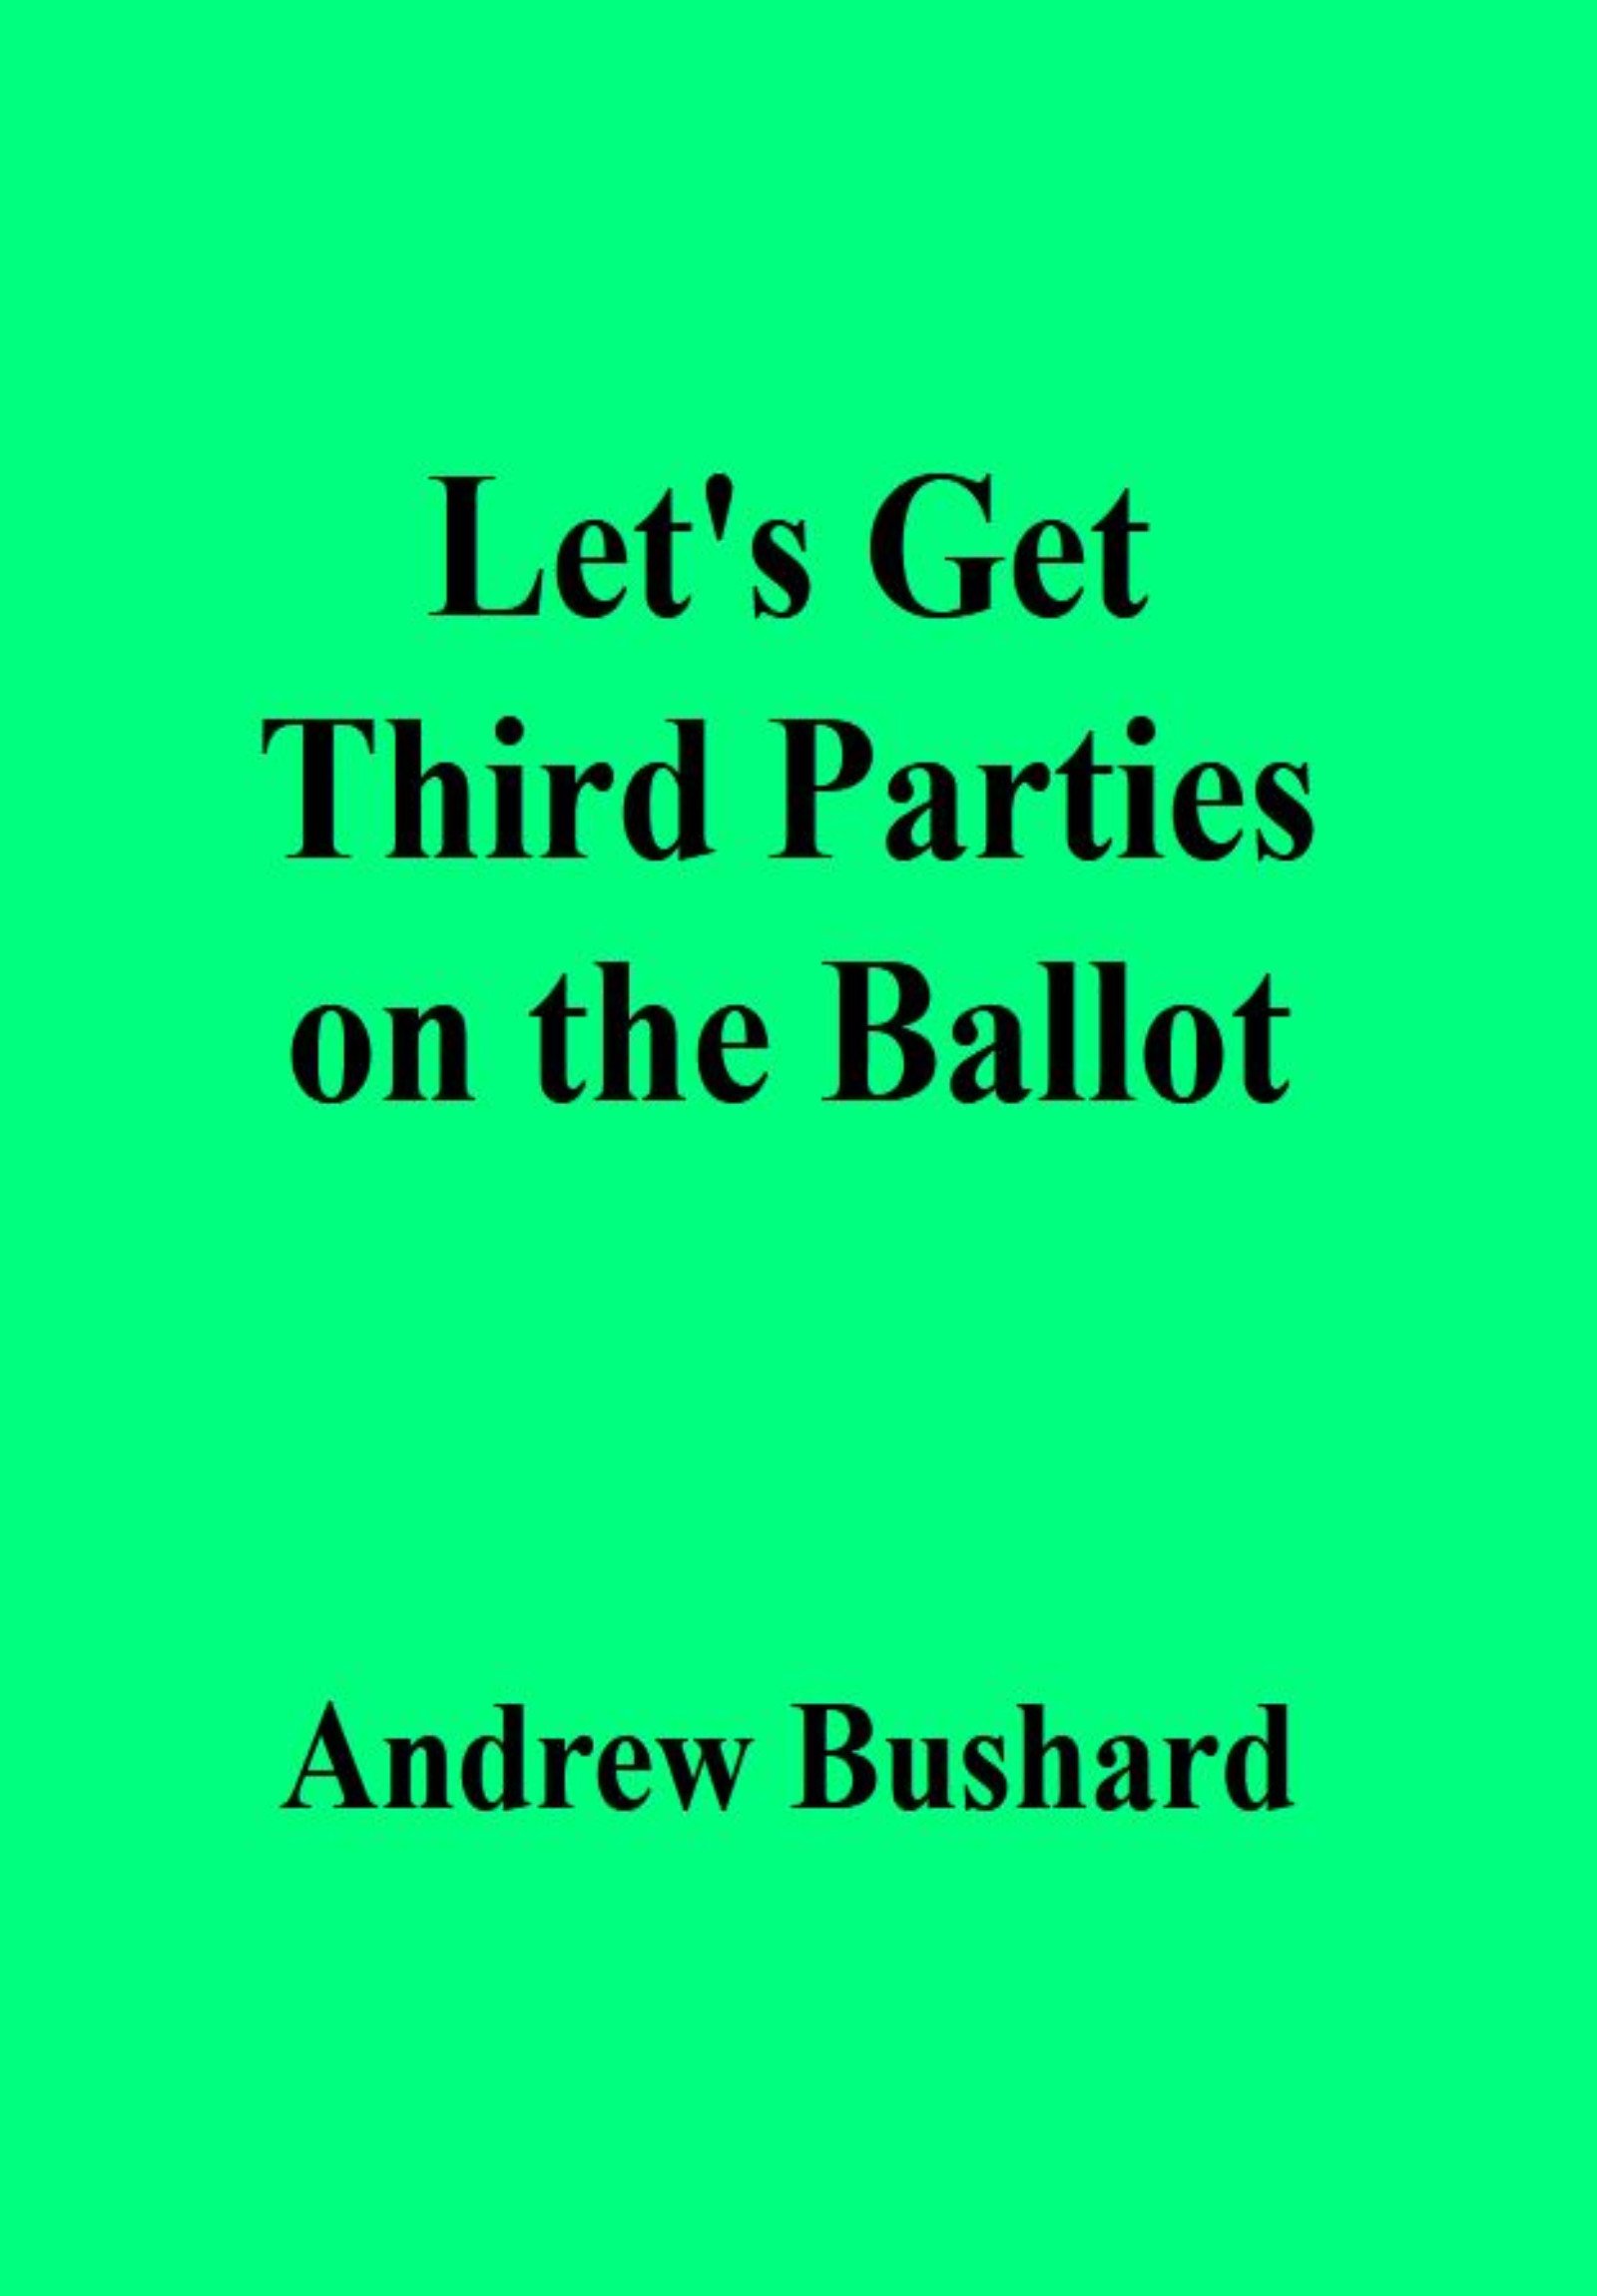 Let's Get Third Parties on the Ballot